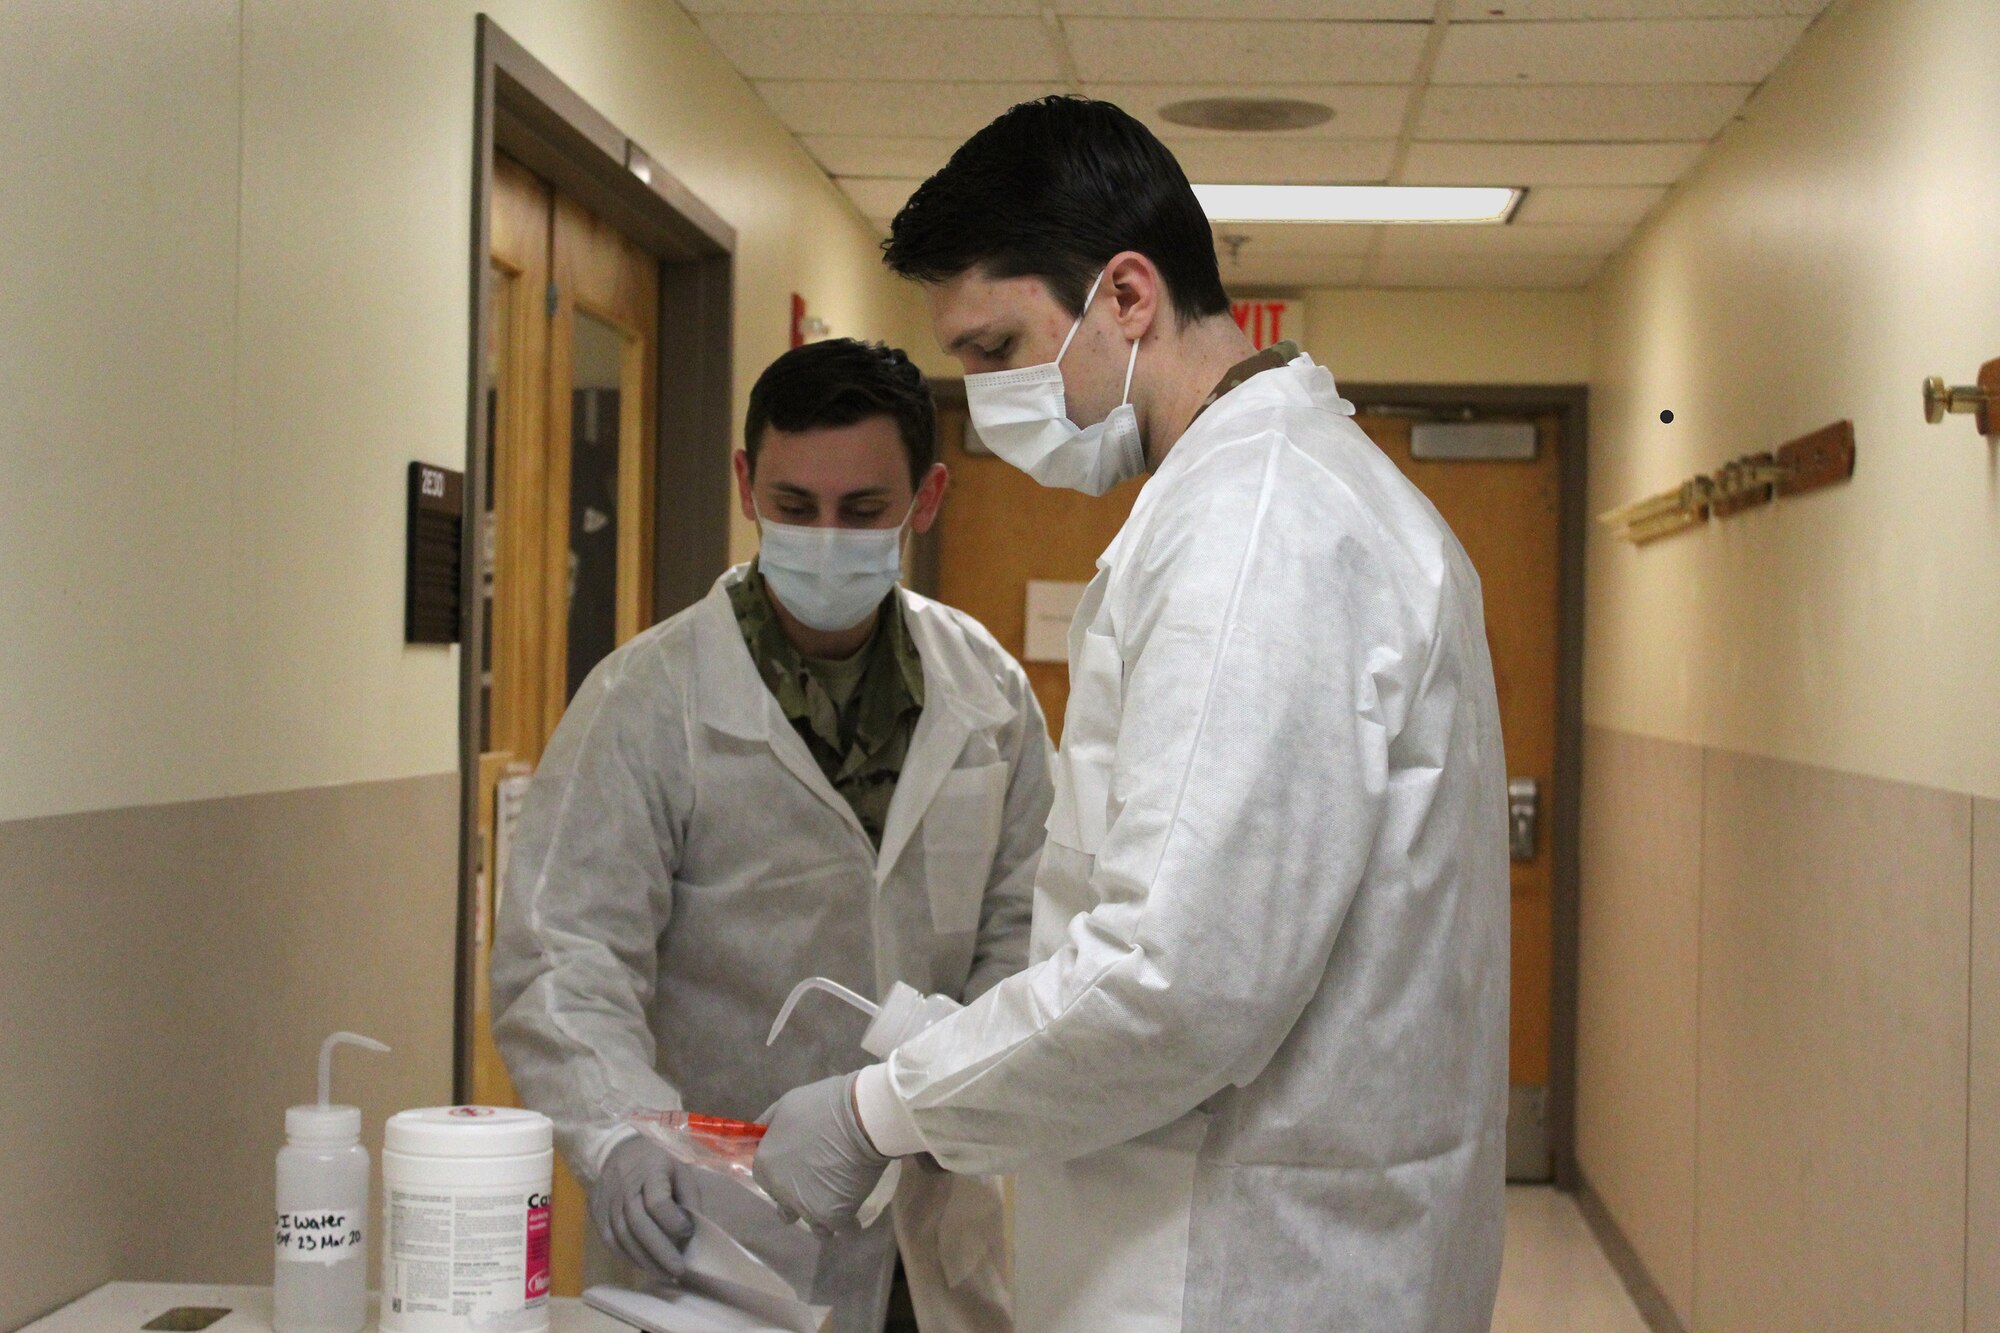 Senior Airman Brian Holloway and Staff Sgt. Gregory Railey decontaminate COVID-19 specimens collected from the 88th Medical Group testing site before login at microbiology and transport to the 711th Human Performance Wing's Epidemiology Lab at the United States Air Force School of Aerospace Medicine (USAFSAM). (U.S. Air Force photo/Kristen Van Wert)